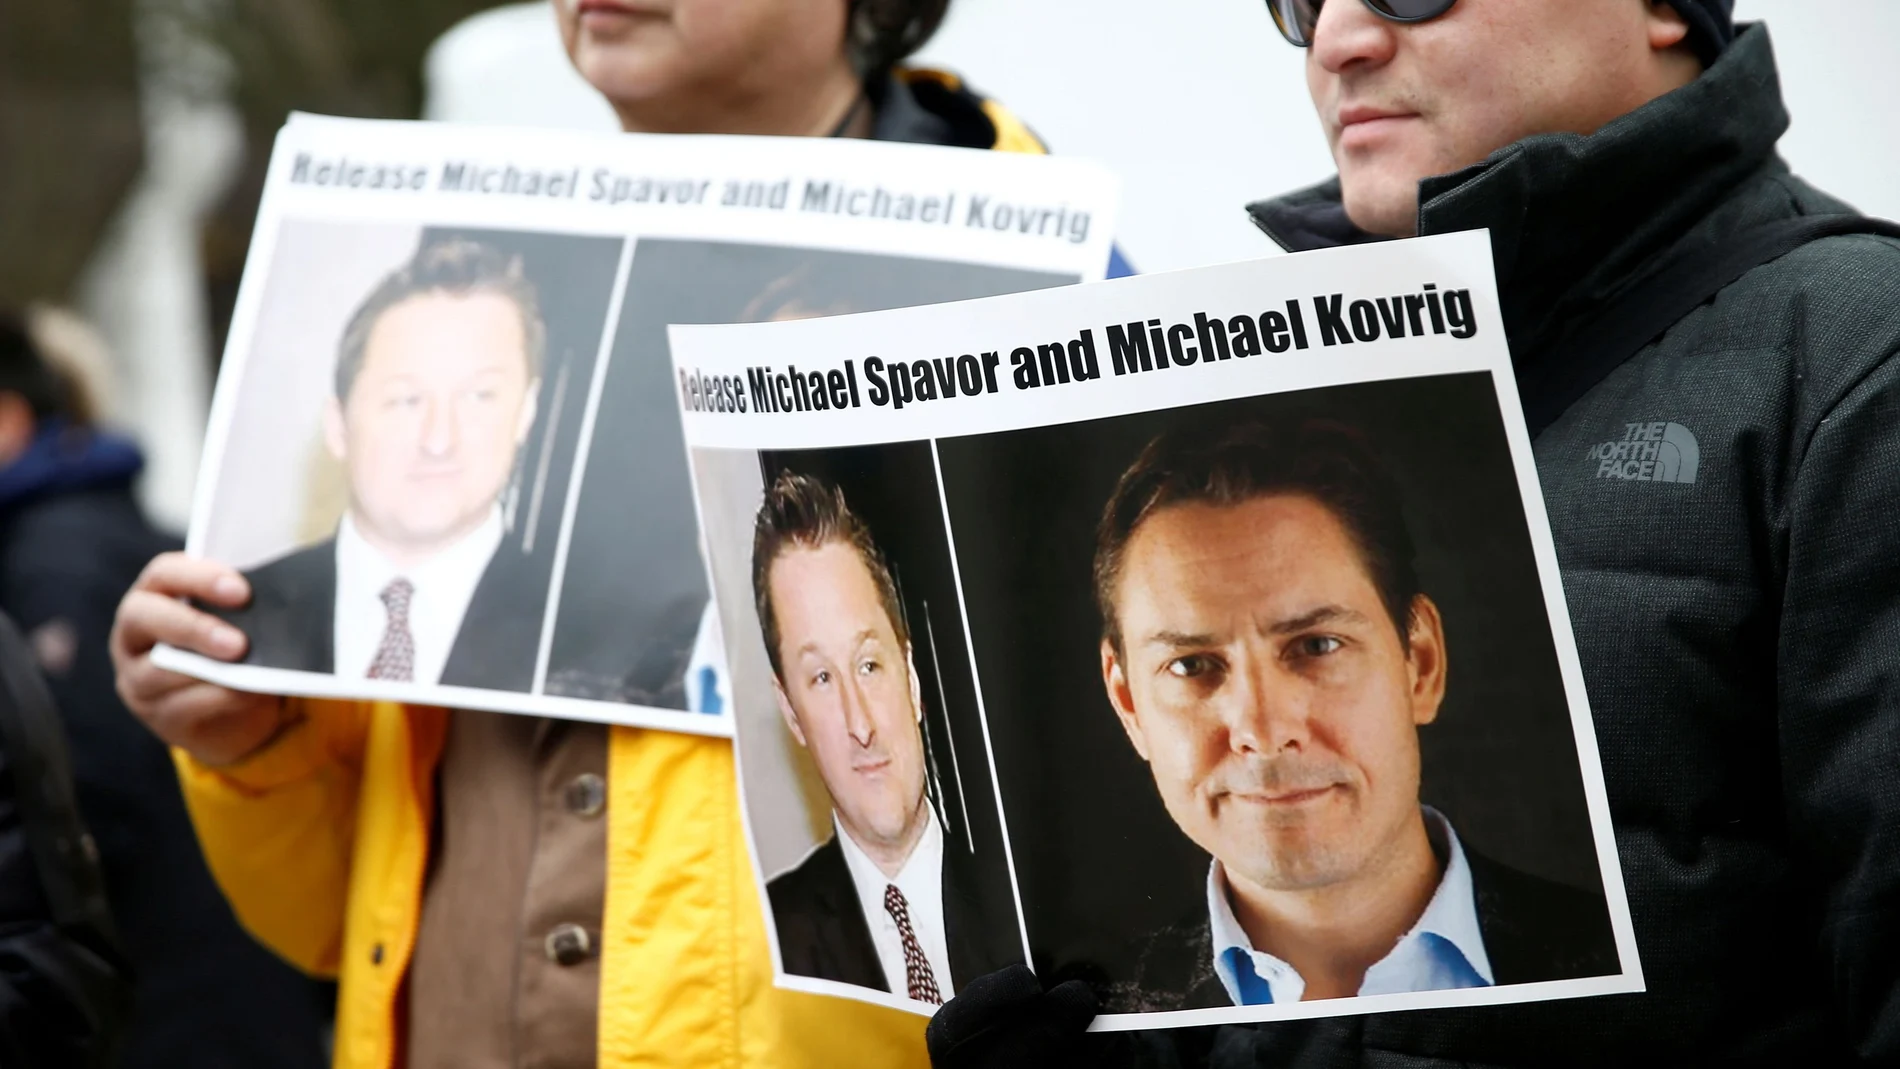 FILE PHOTO: People hold signs calling for China to release Canadian detainees Spavor and Kovrig during an extradition hearing for Huawei Technologies Chief Financial Officer Meng Wanzhou at the B.C. Supreme Court in Vancouver